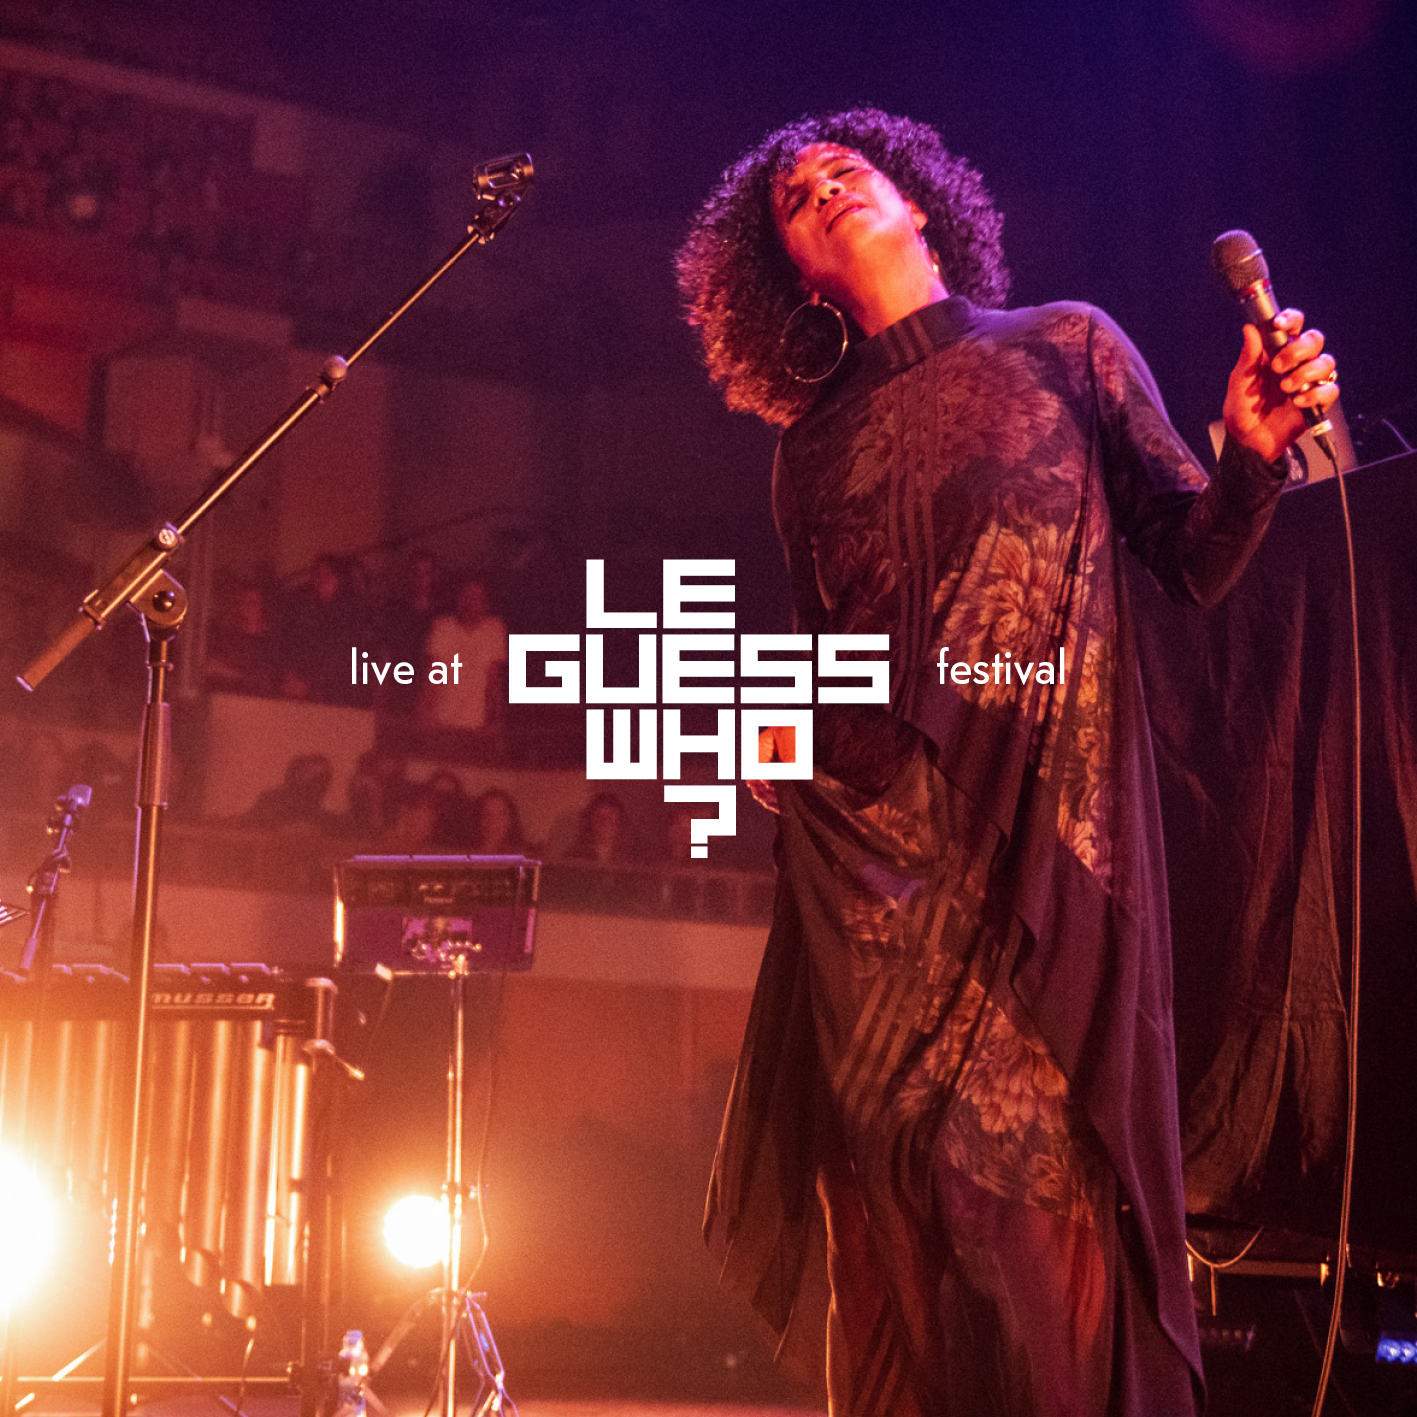 Watch + listen: Neneh Cherry live at Le Guess Who? 2018, performing tracks from 'Broken Politics'